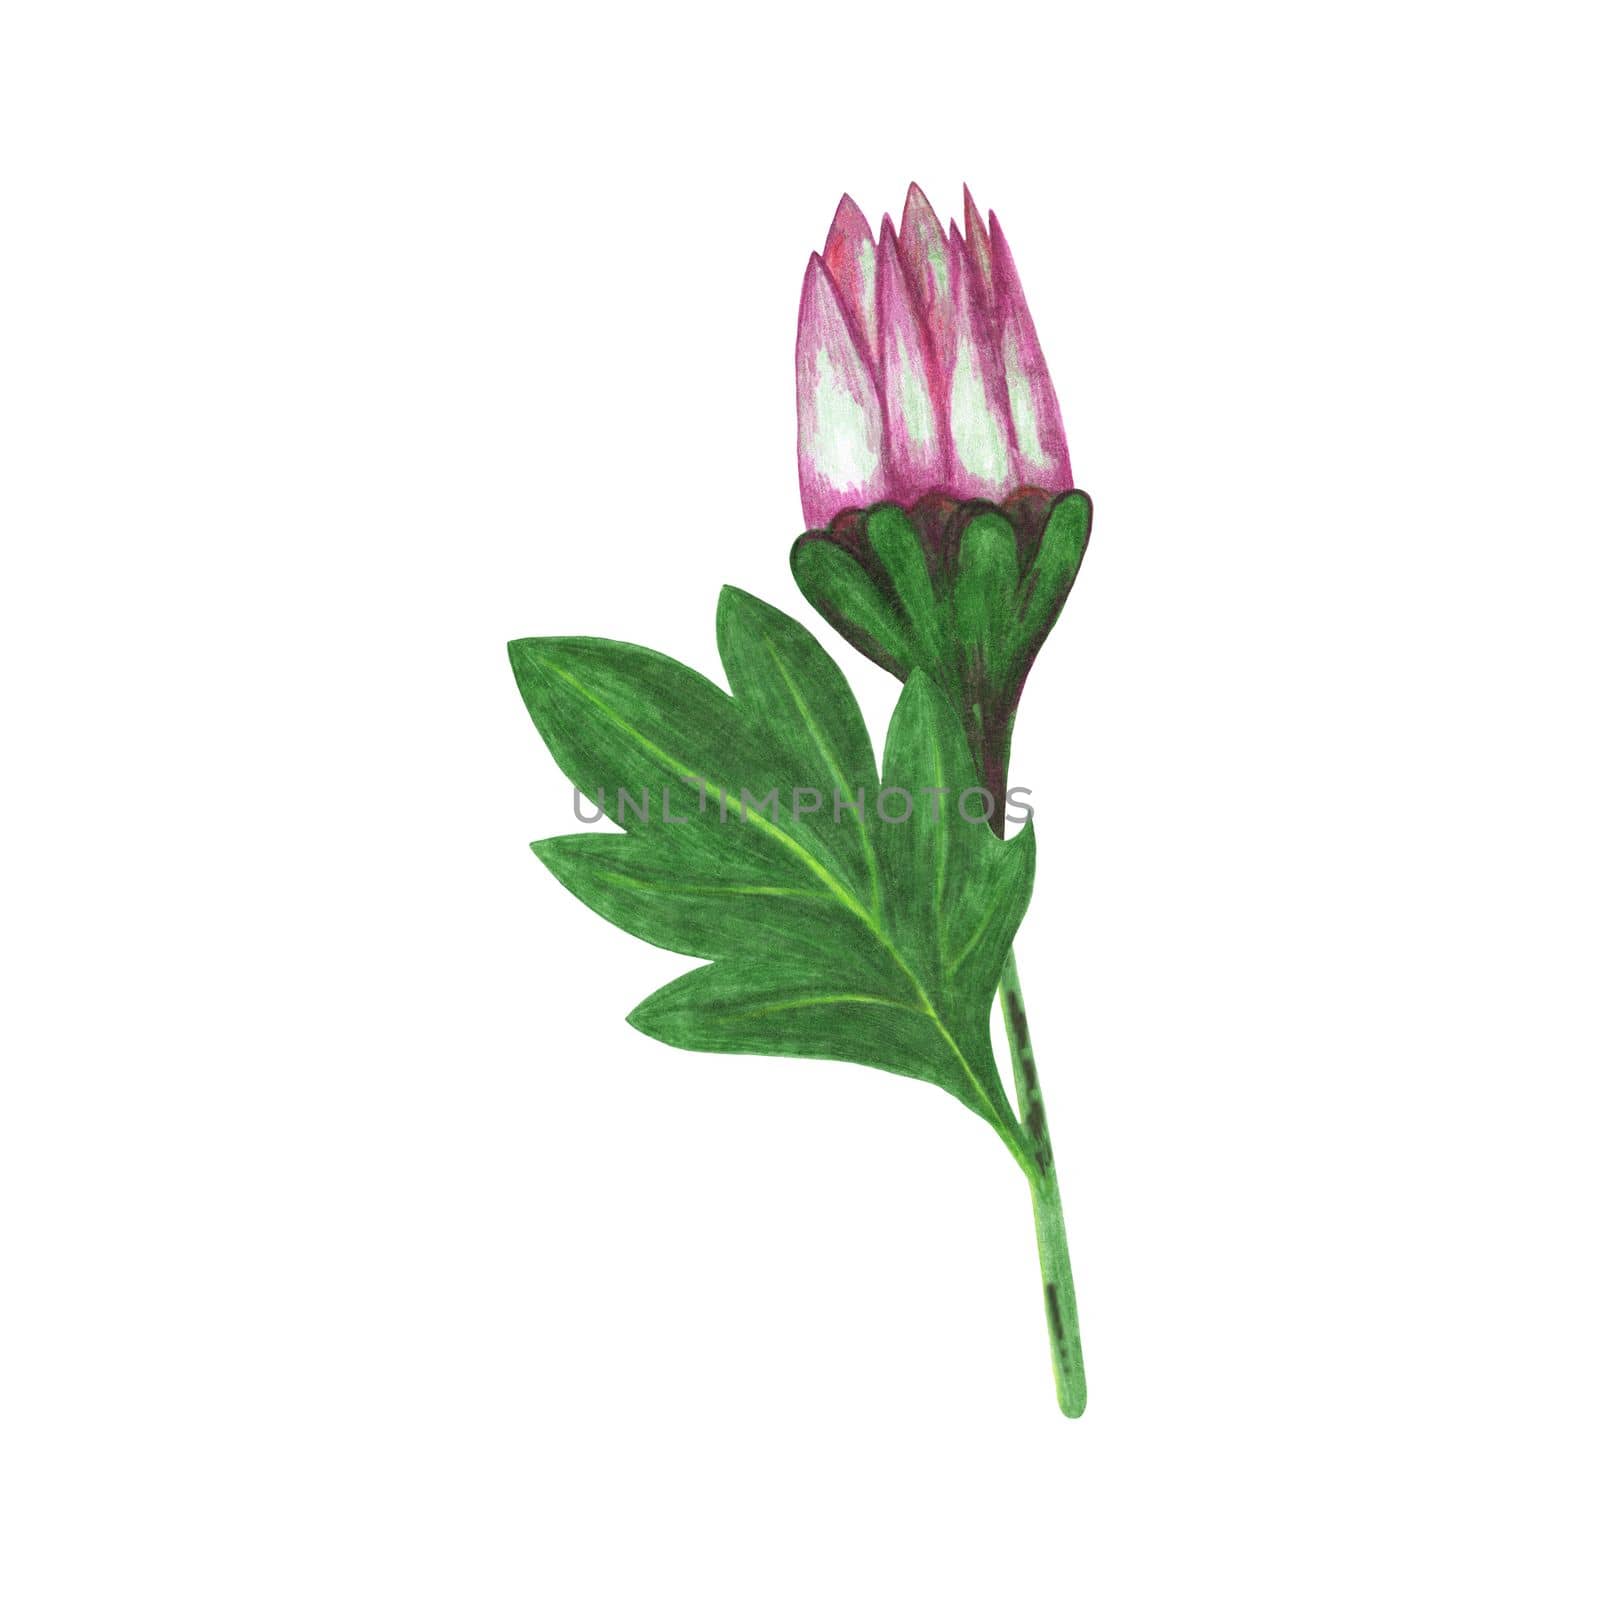 Red Chrysanthemum with Green Leaves Isolated on White Background. Chrysanthemum Flower Element Drawn by Color Pencil.